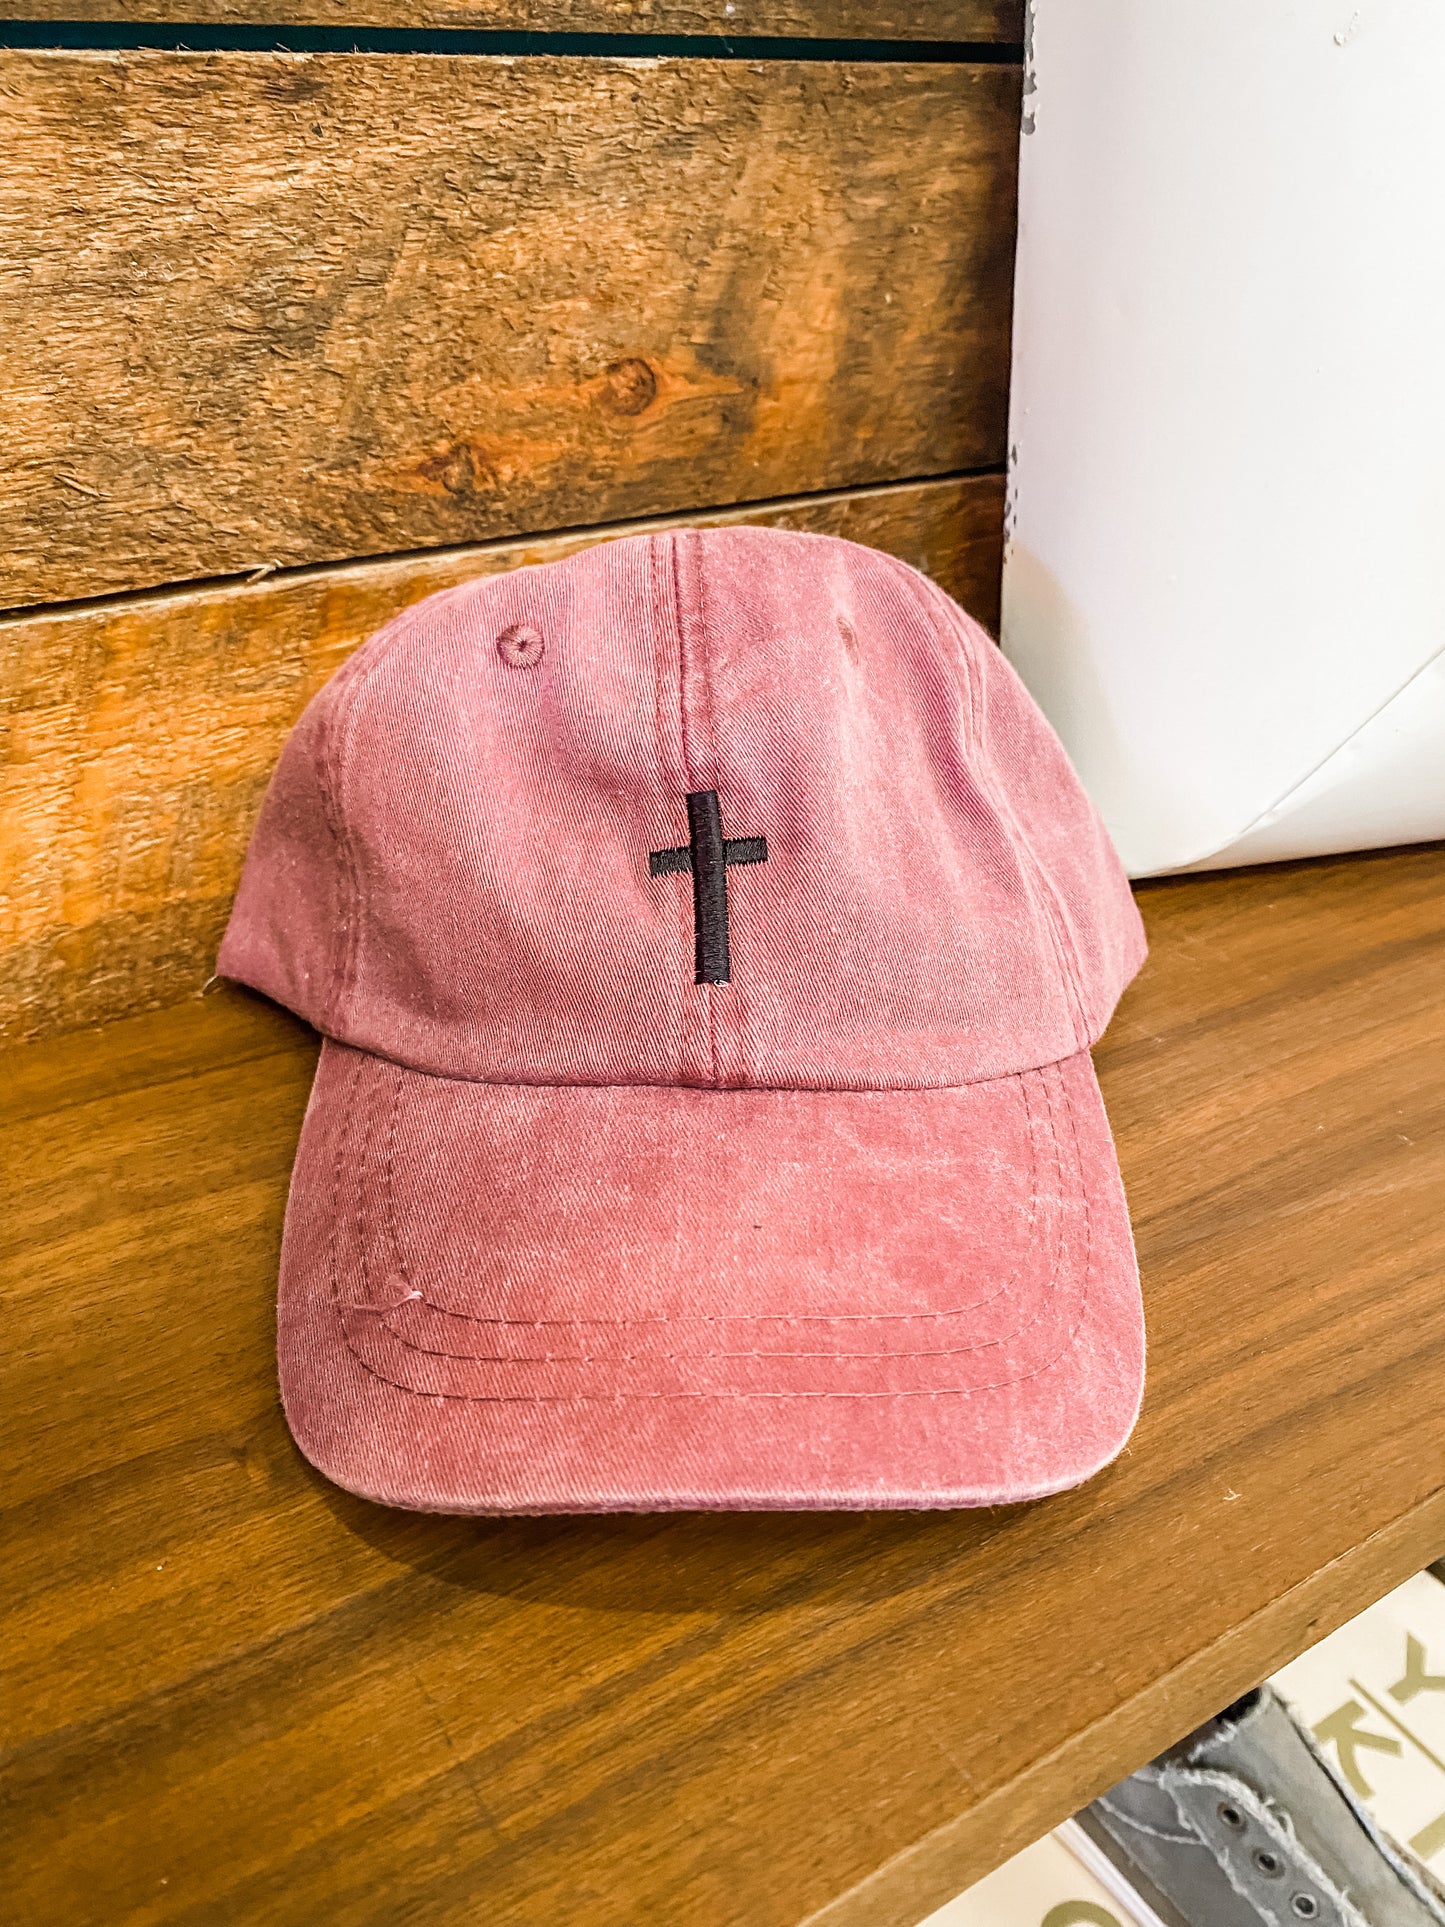 Thread Embroidered Cross Hat